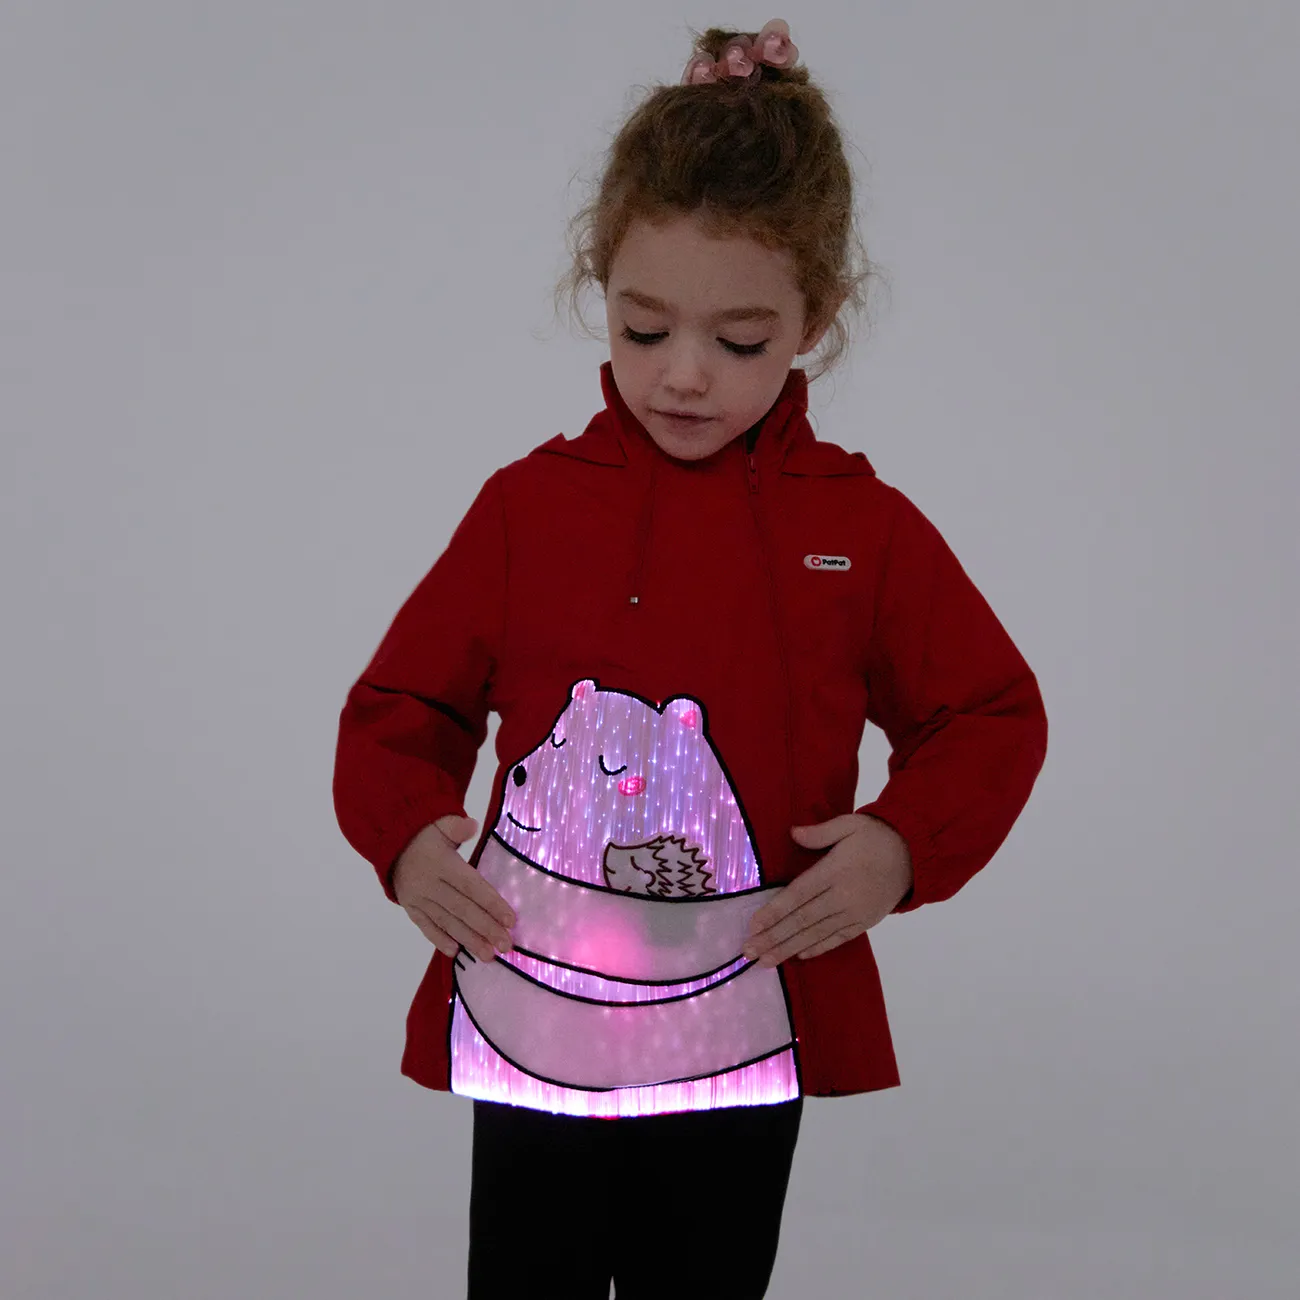 Go-Glow Illuminating Jacket with Light Up Hug Bear Including Controller (Built-In Battery) REDWHITE big image 1